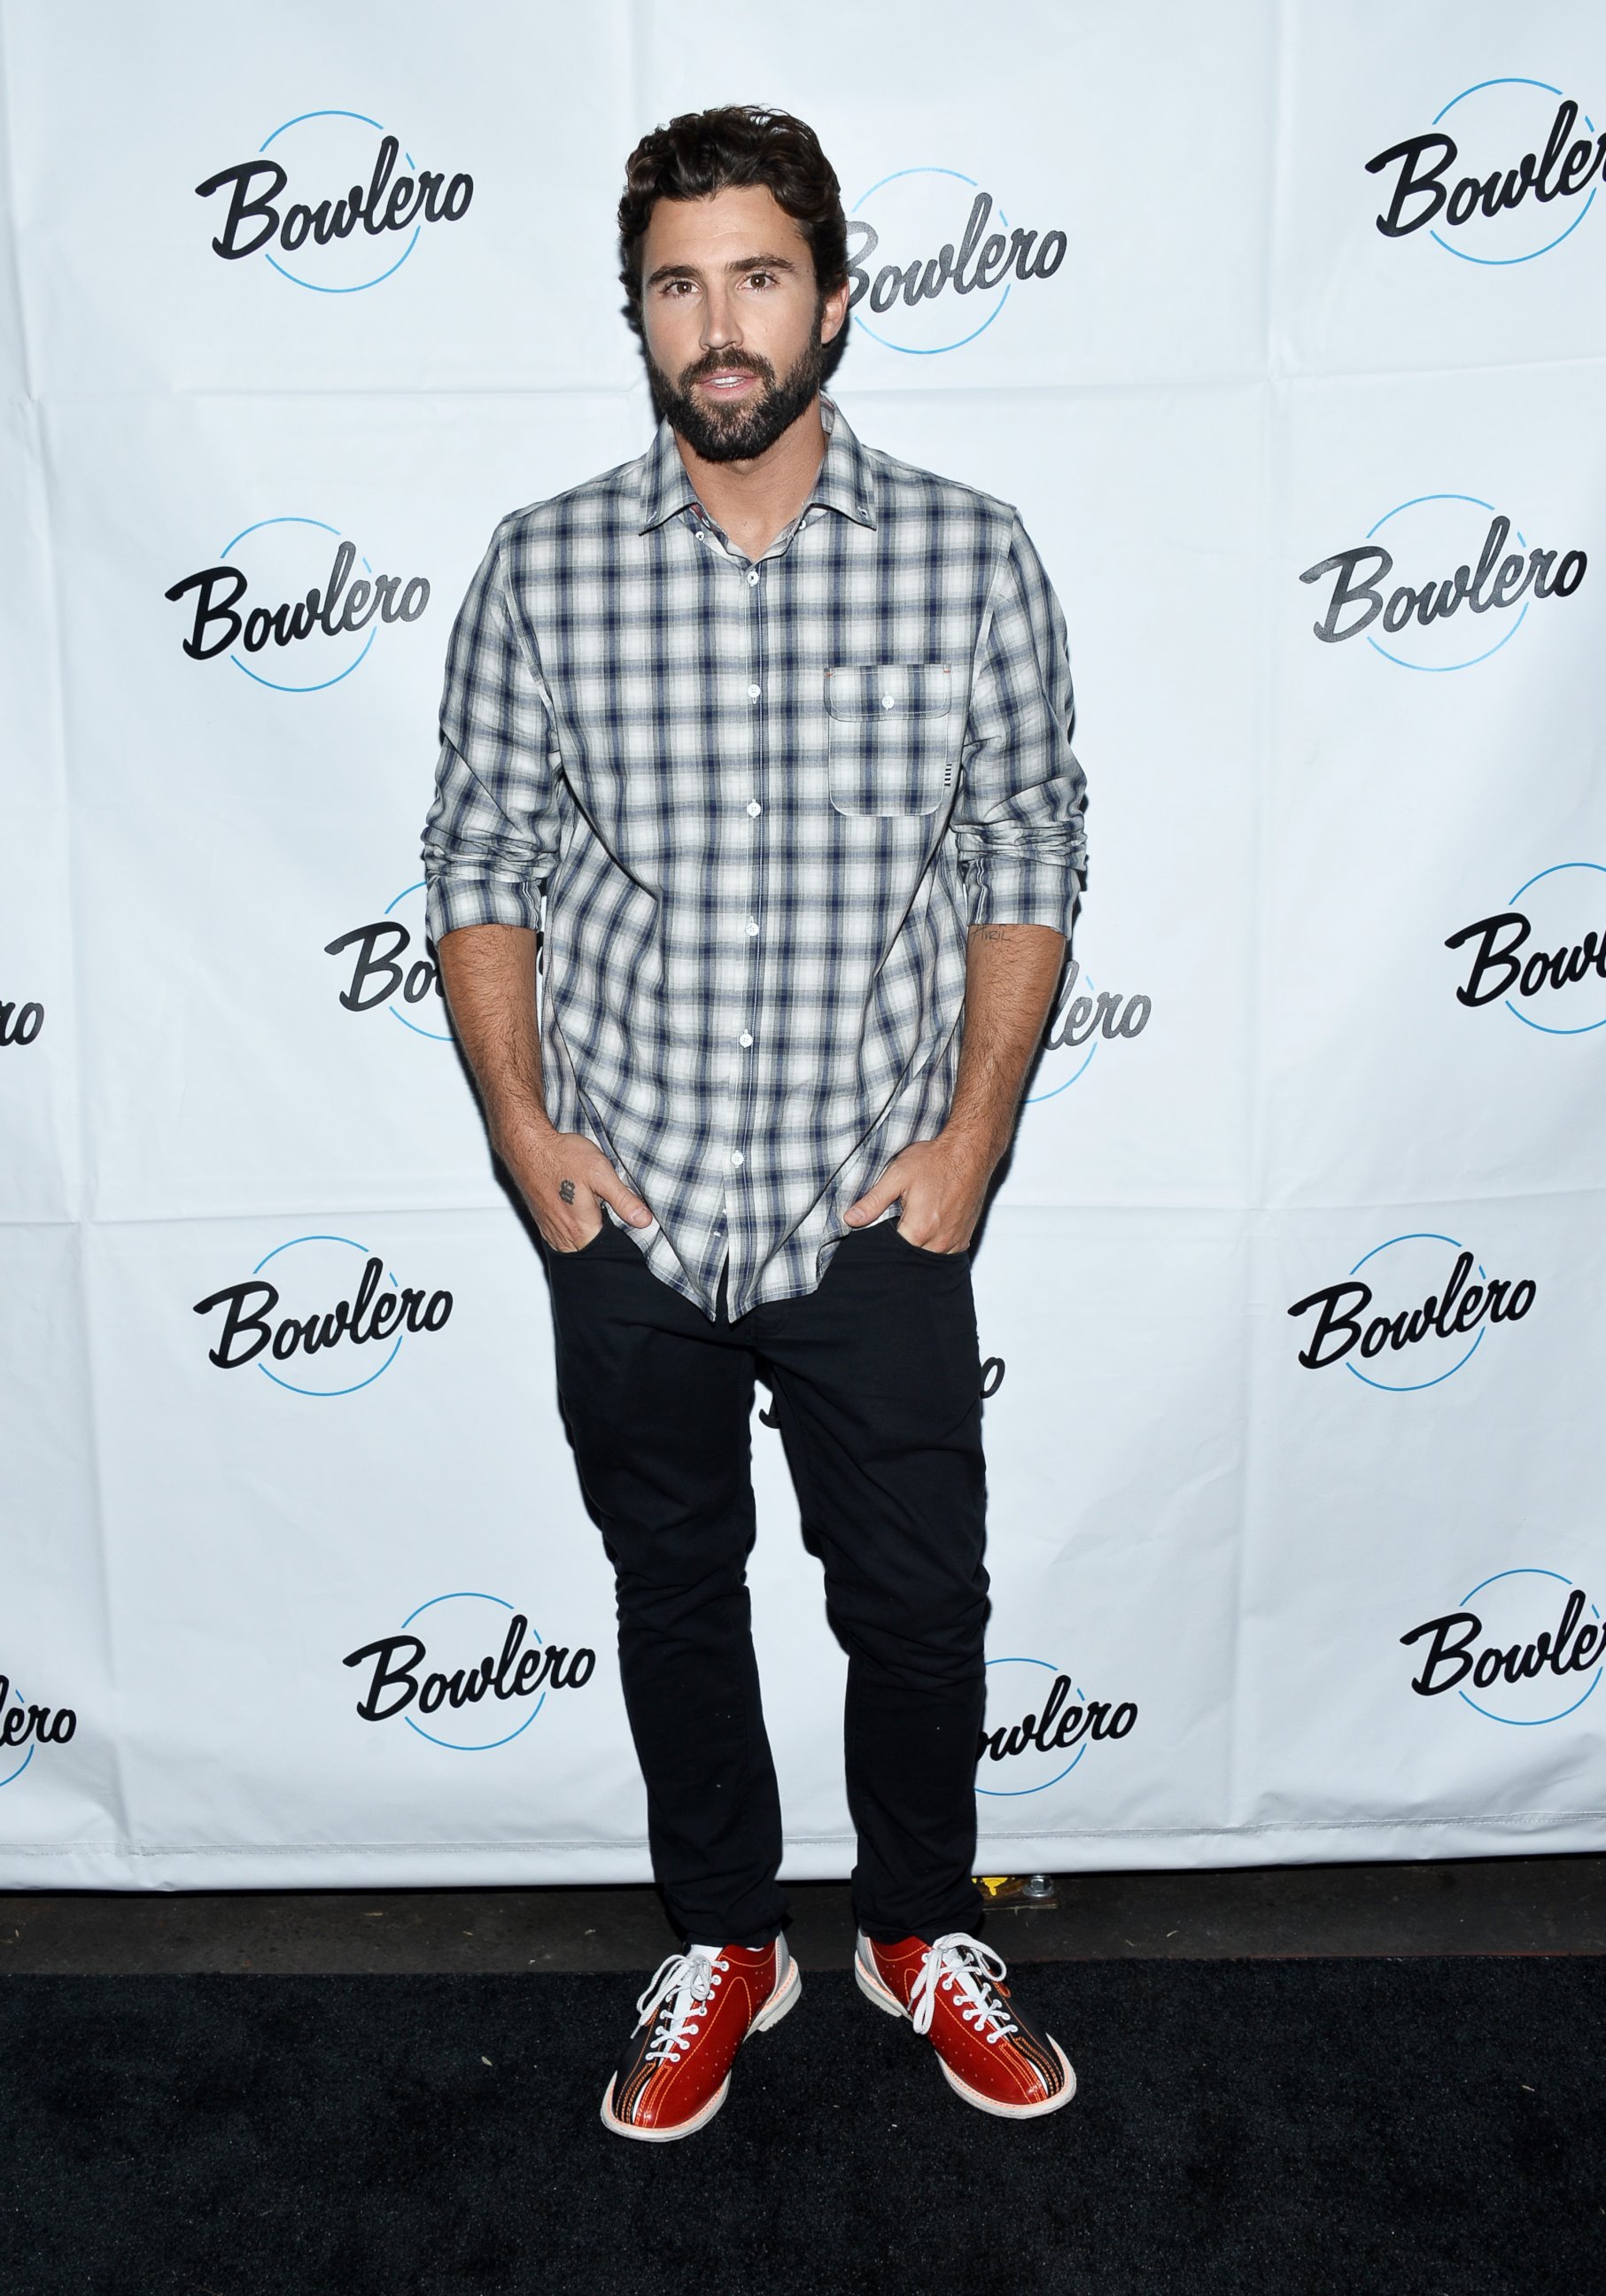 PHOTO: Brody Jenner arrives at the Bowlero Mar Vista celebrity grand opening at Bowlero on April 9, 2015 in Mar Vista, Calif.